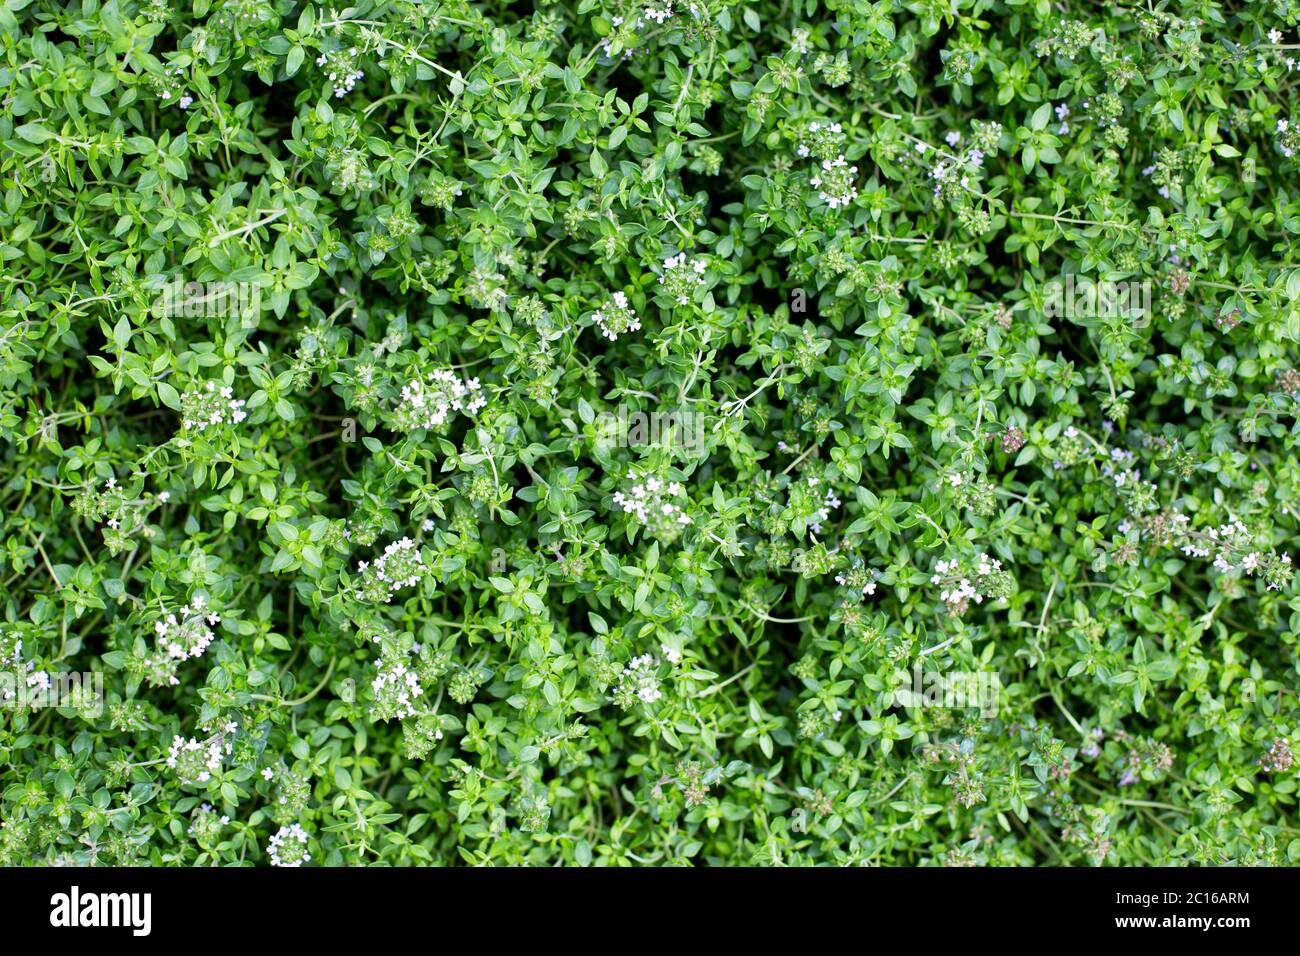 Thyme plant background. Green thyme leaves pattern. Herbal background. Stock Photo